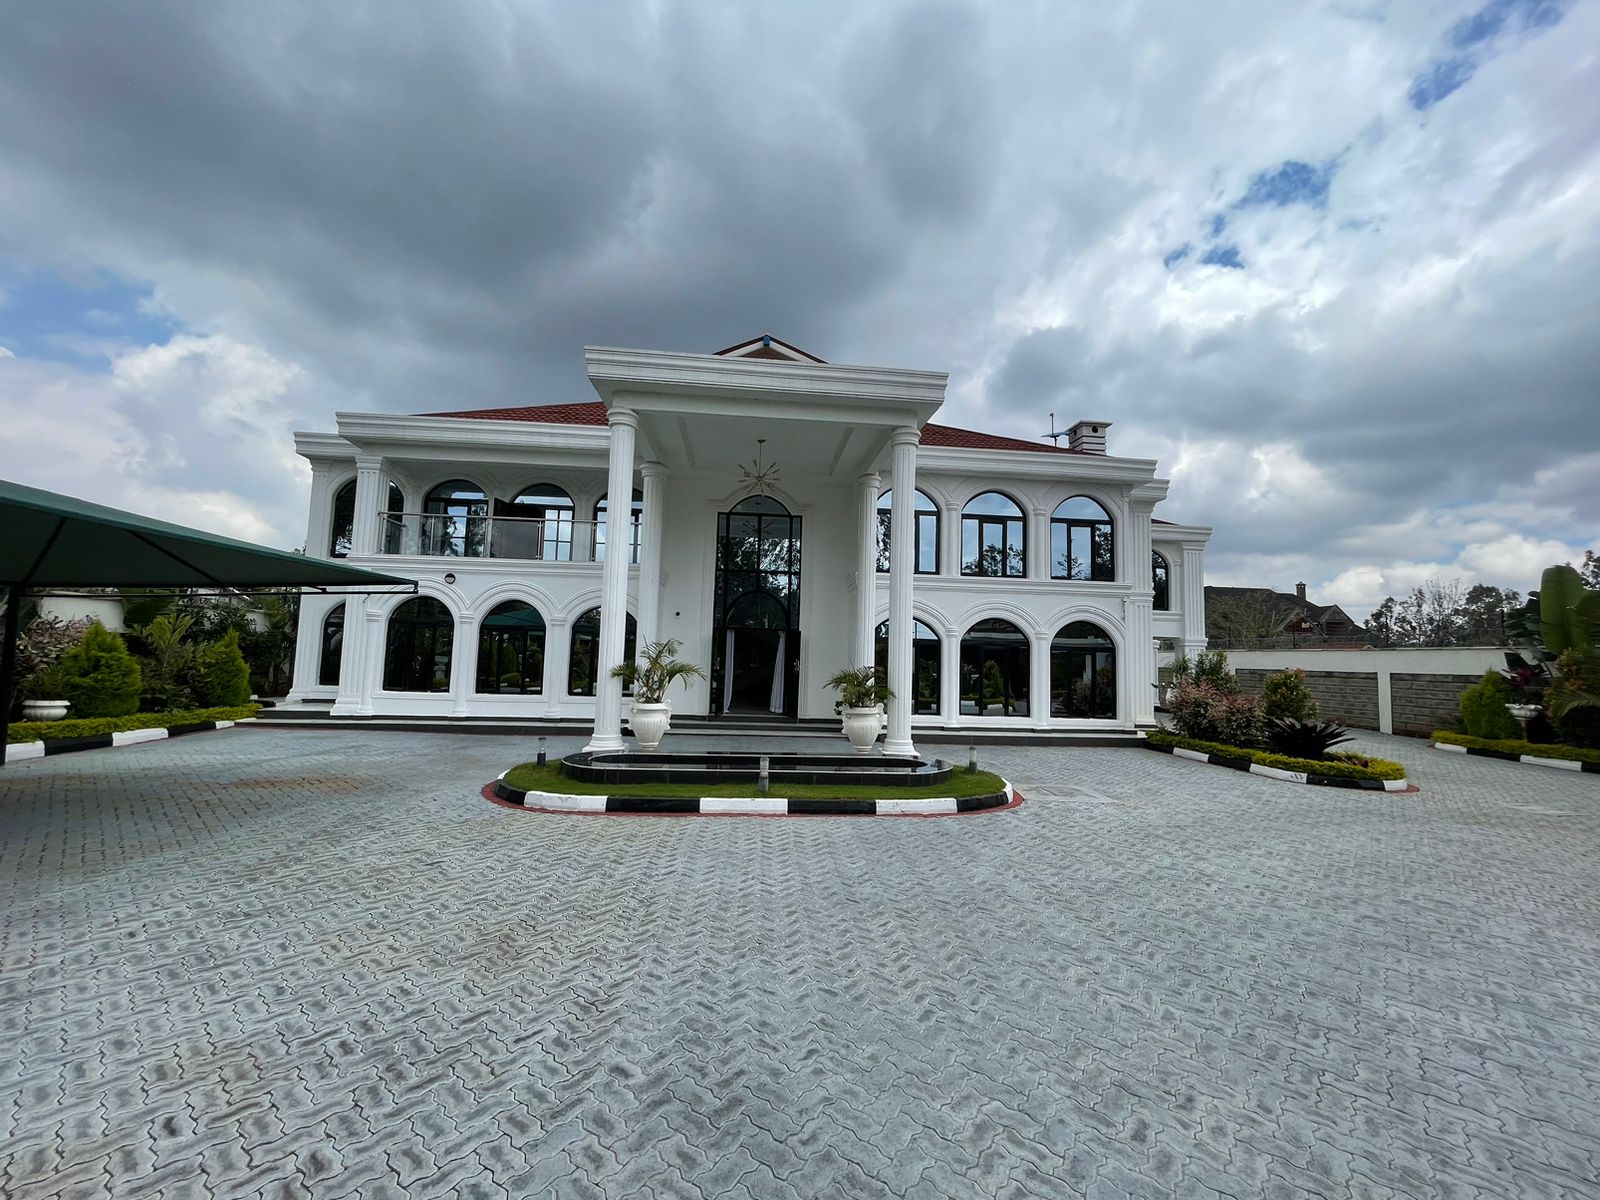 7 BEDROOMS ALL ENSUITE HOUSE ON SALE IN KAREN. In a gated community. Sitted on ½ acre. Has generator, well-manicured lawn. 170M Musilli Homes